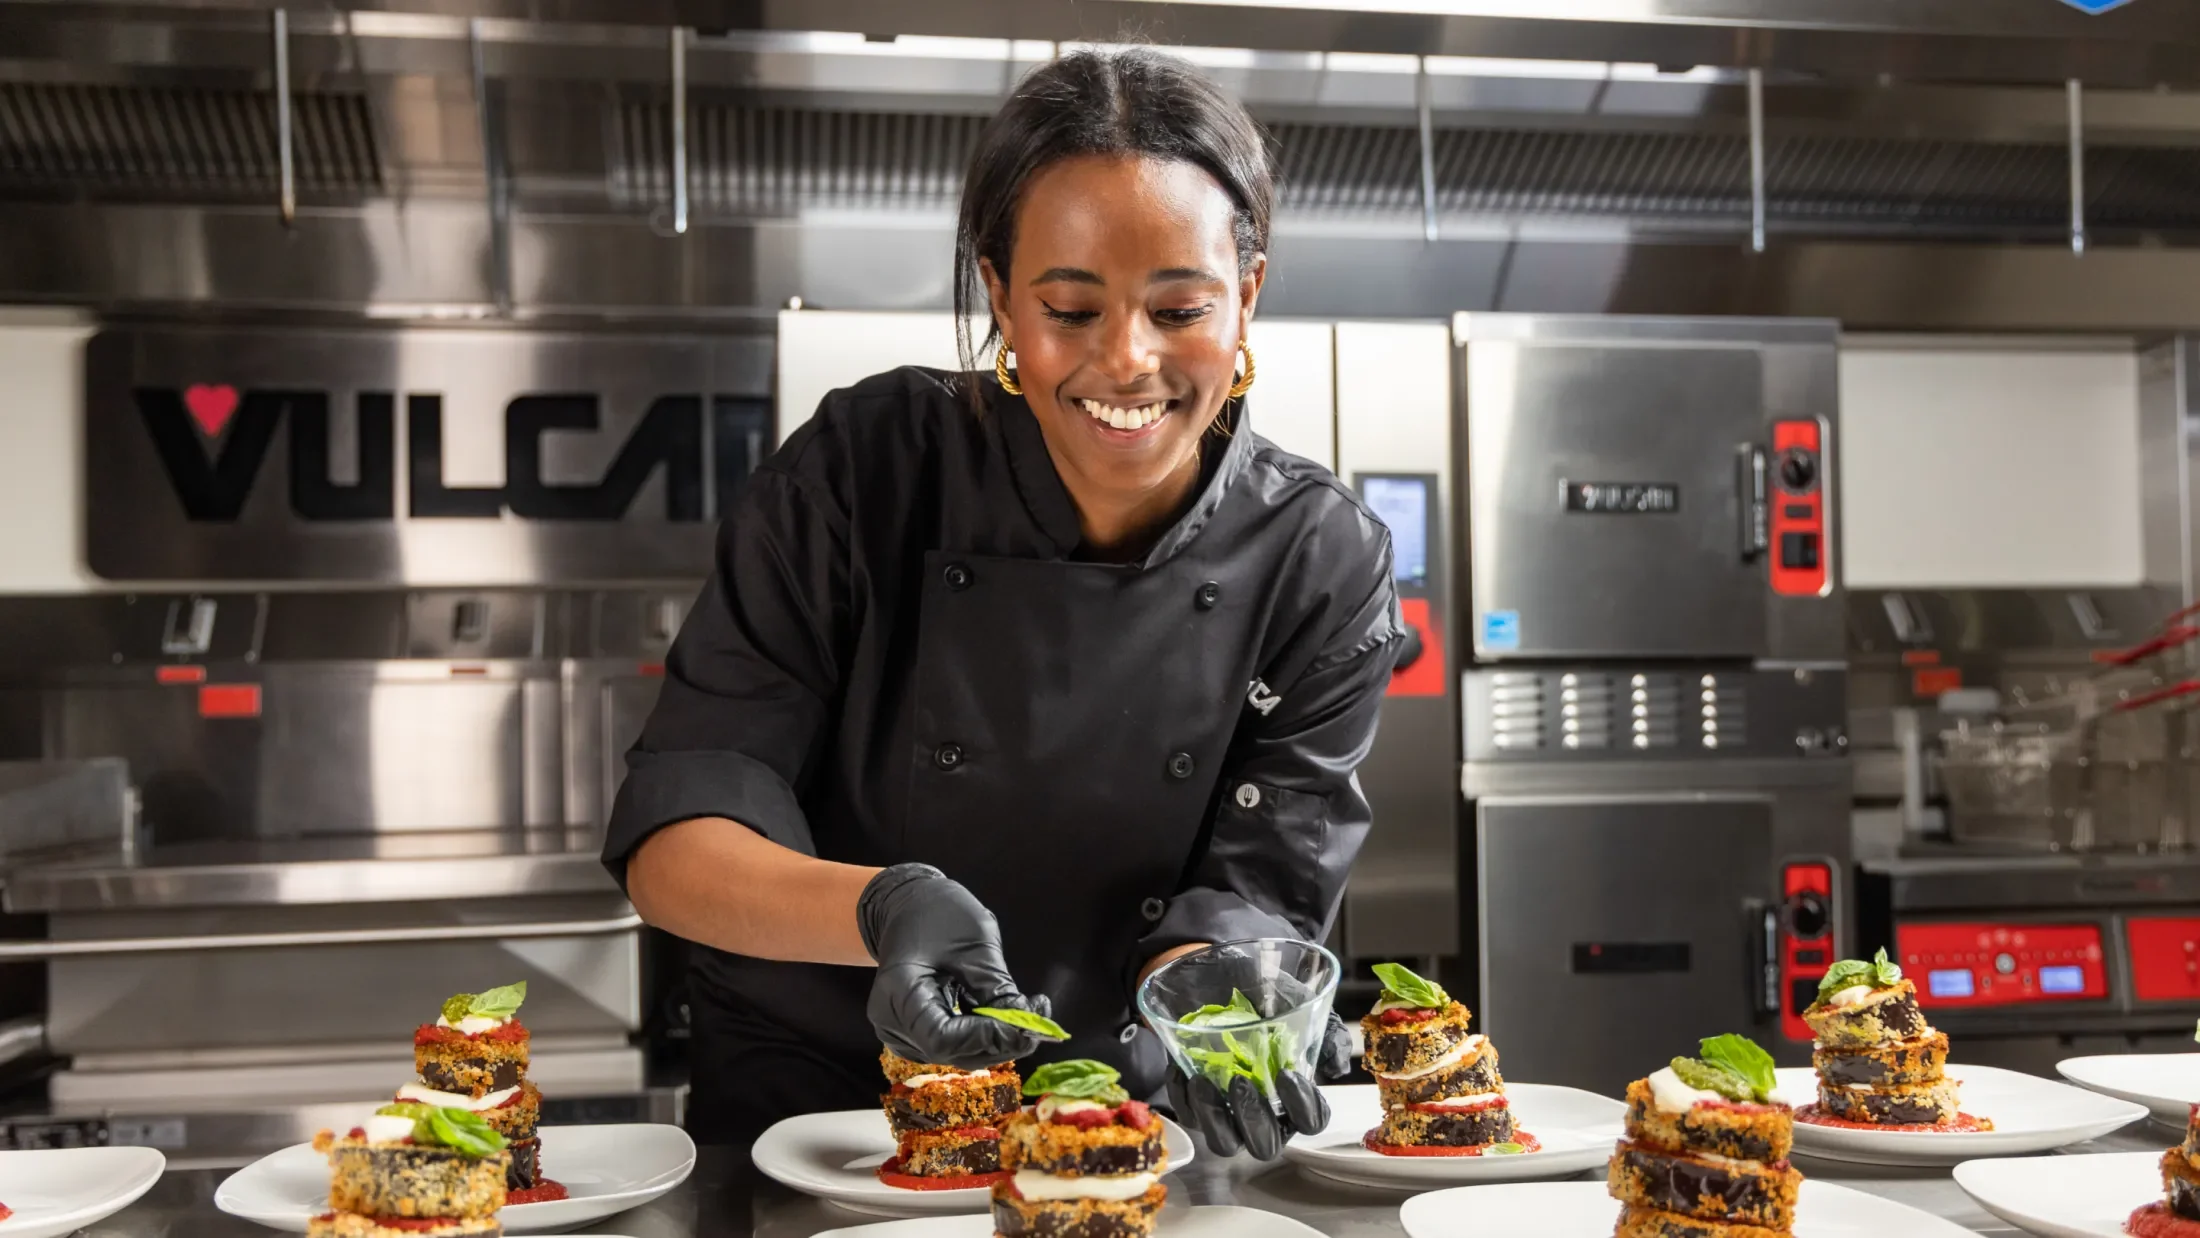 Smiling chef in a Vulcan kitchen plating several identical dishes